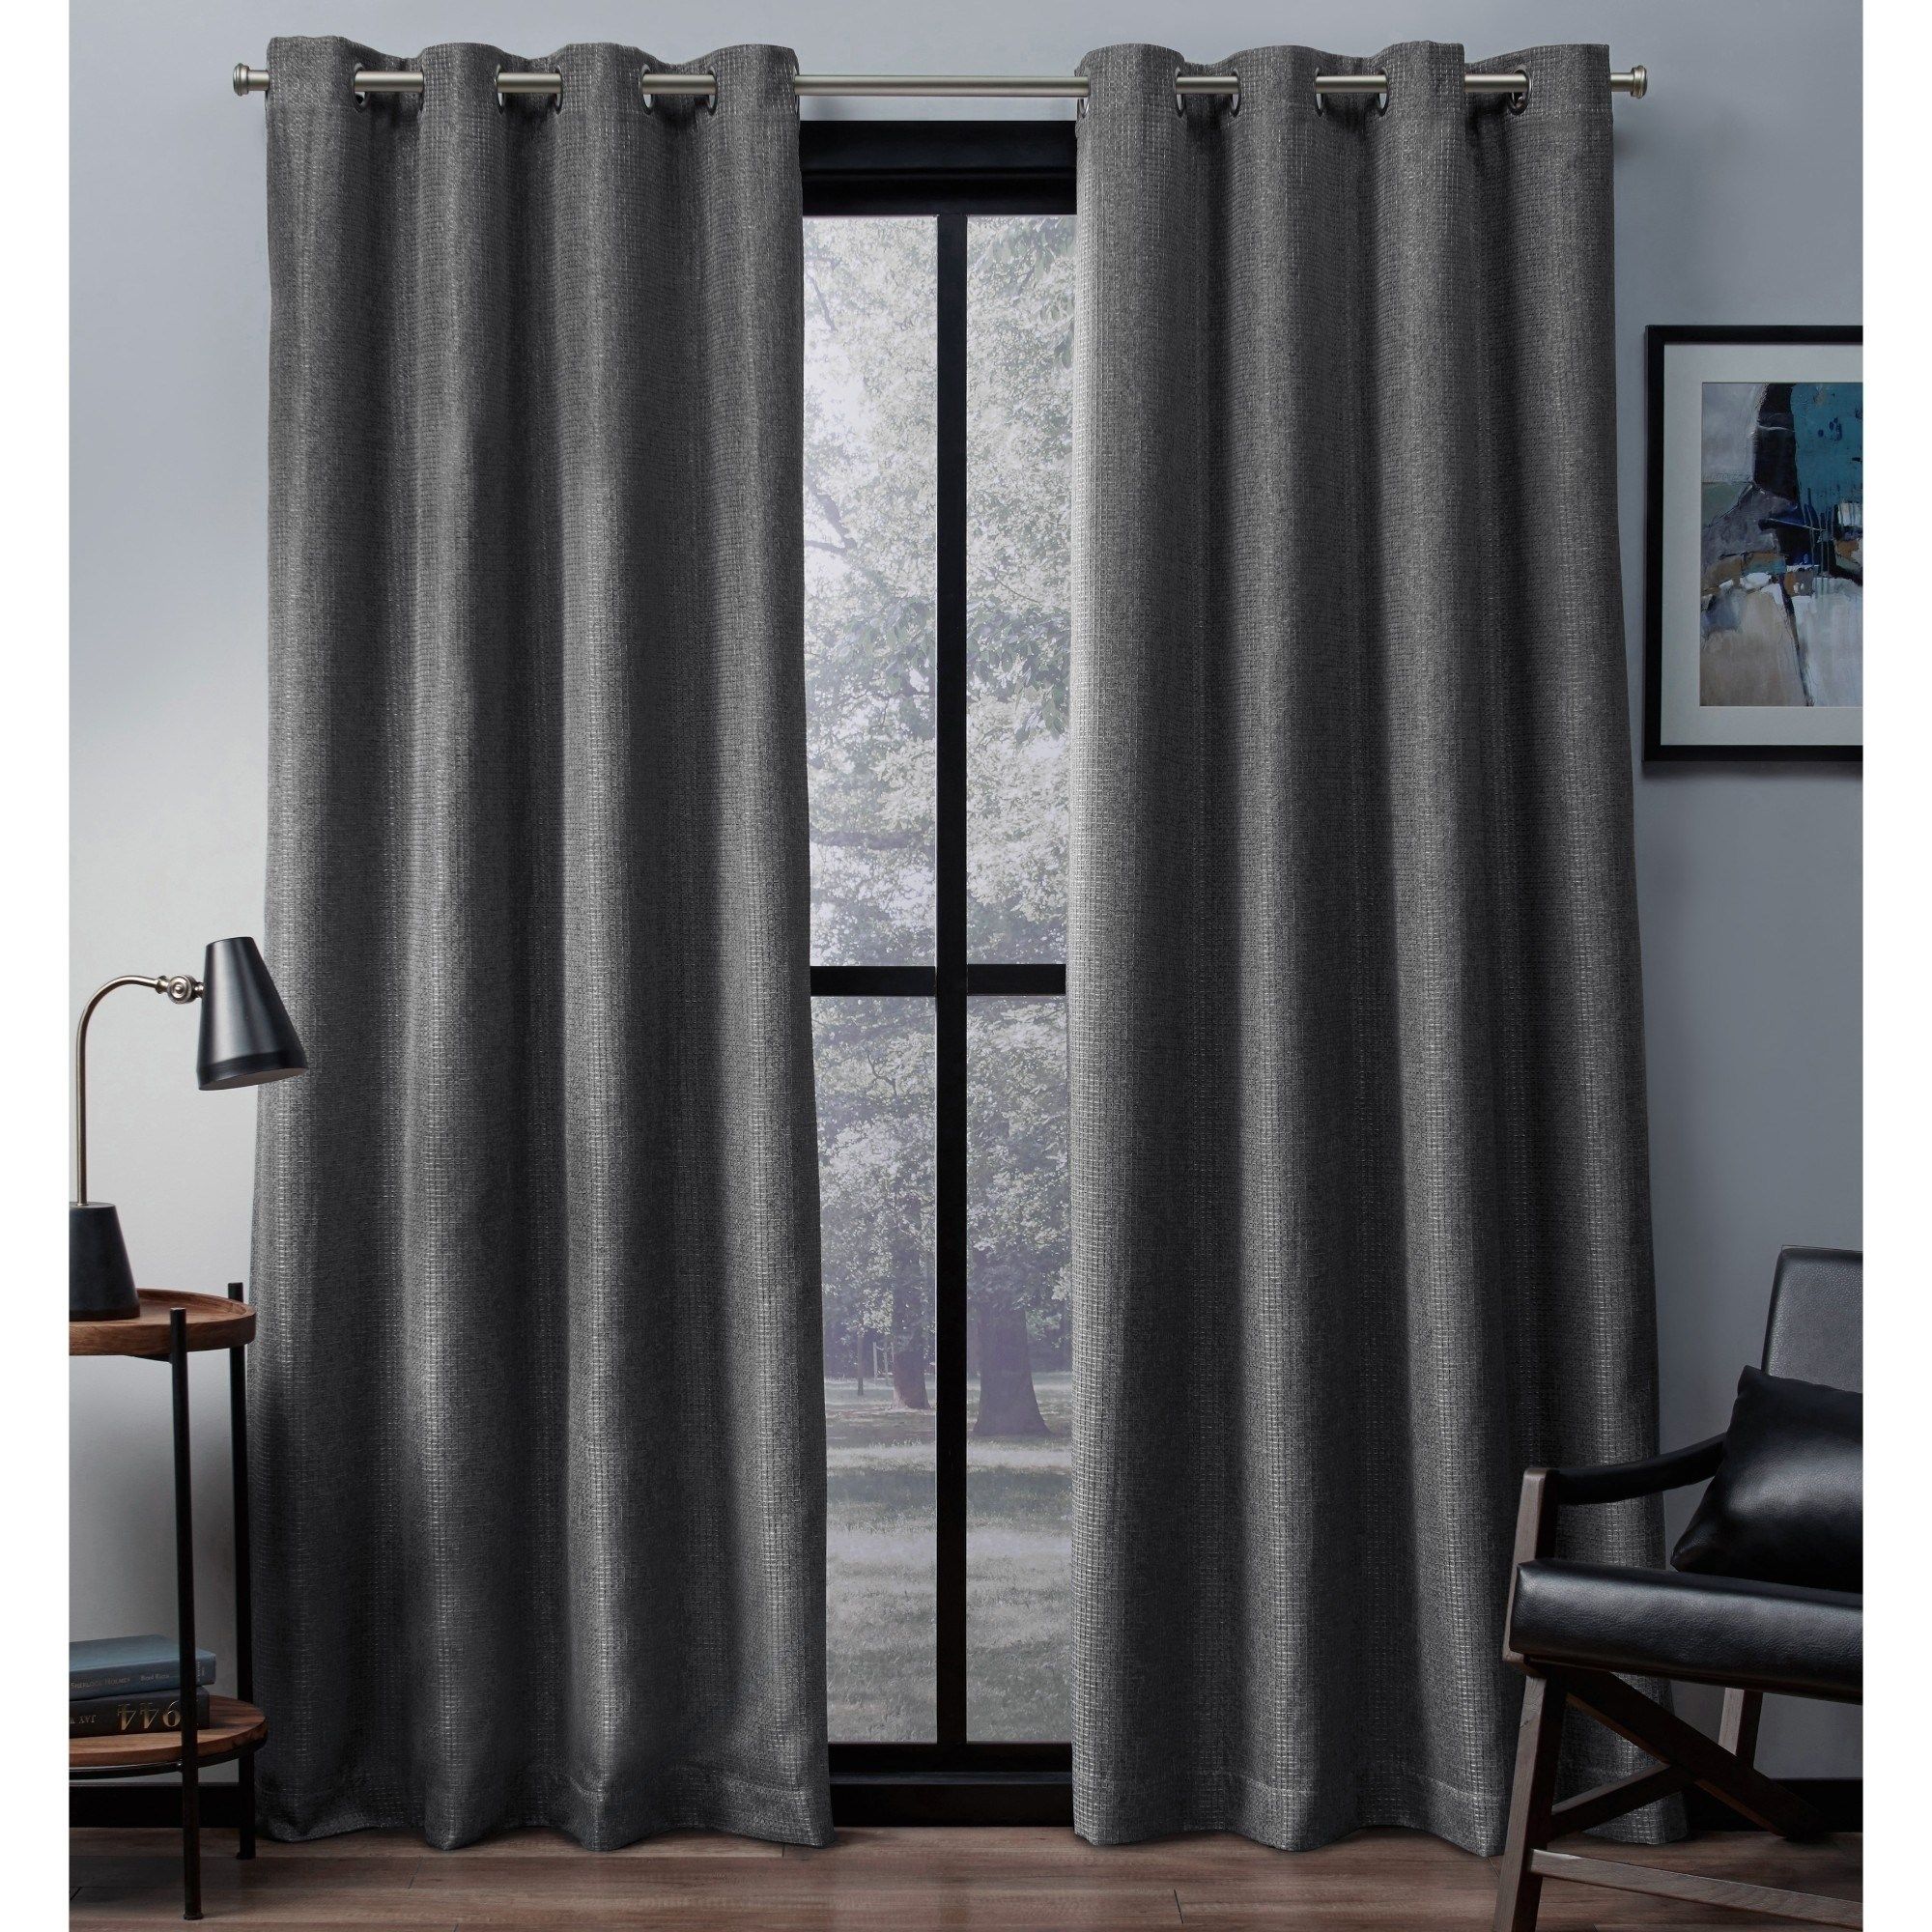 Ati Home Eglinton Woven Blackout Grommet Top Curtain Panel Regarding Woven Blackout Curtain Panel Pairs With Grommet Top (View 11 of 30)